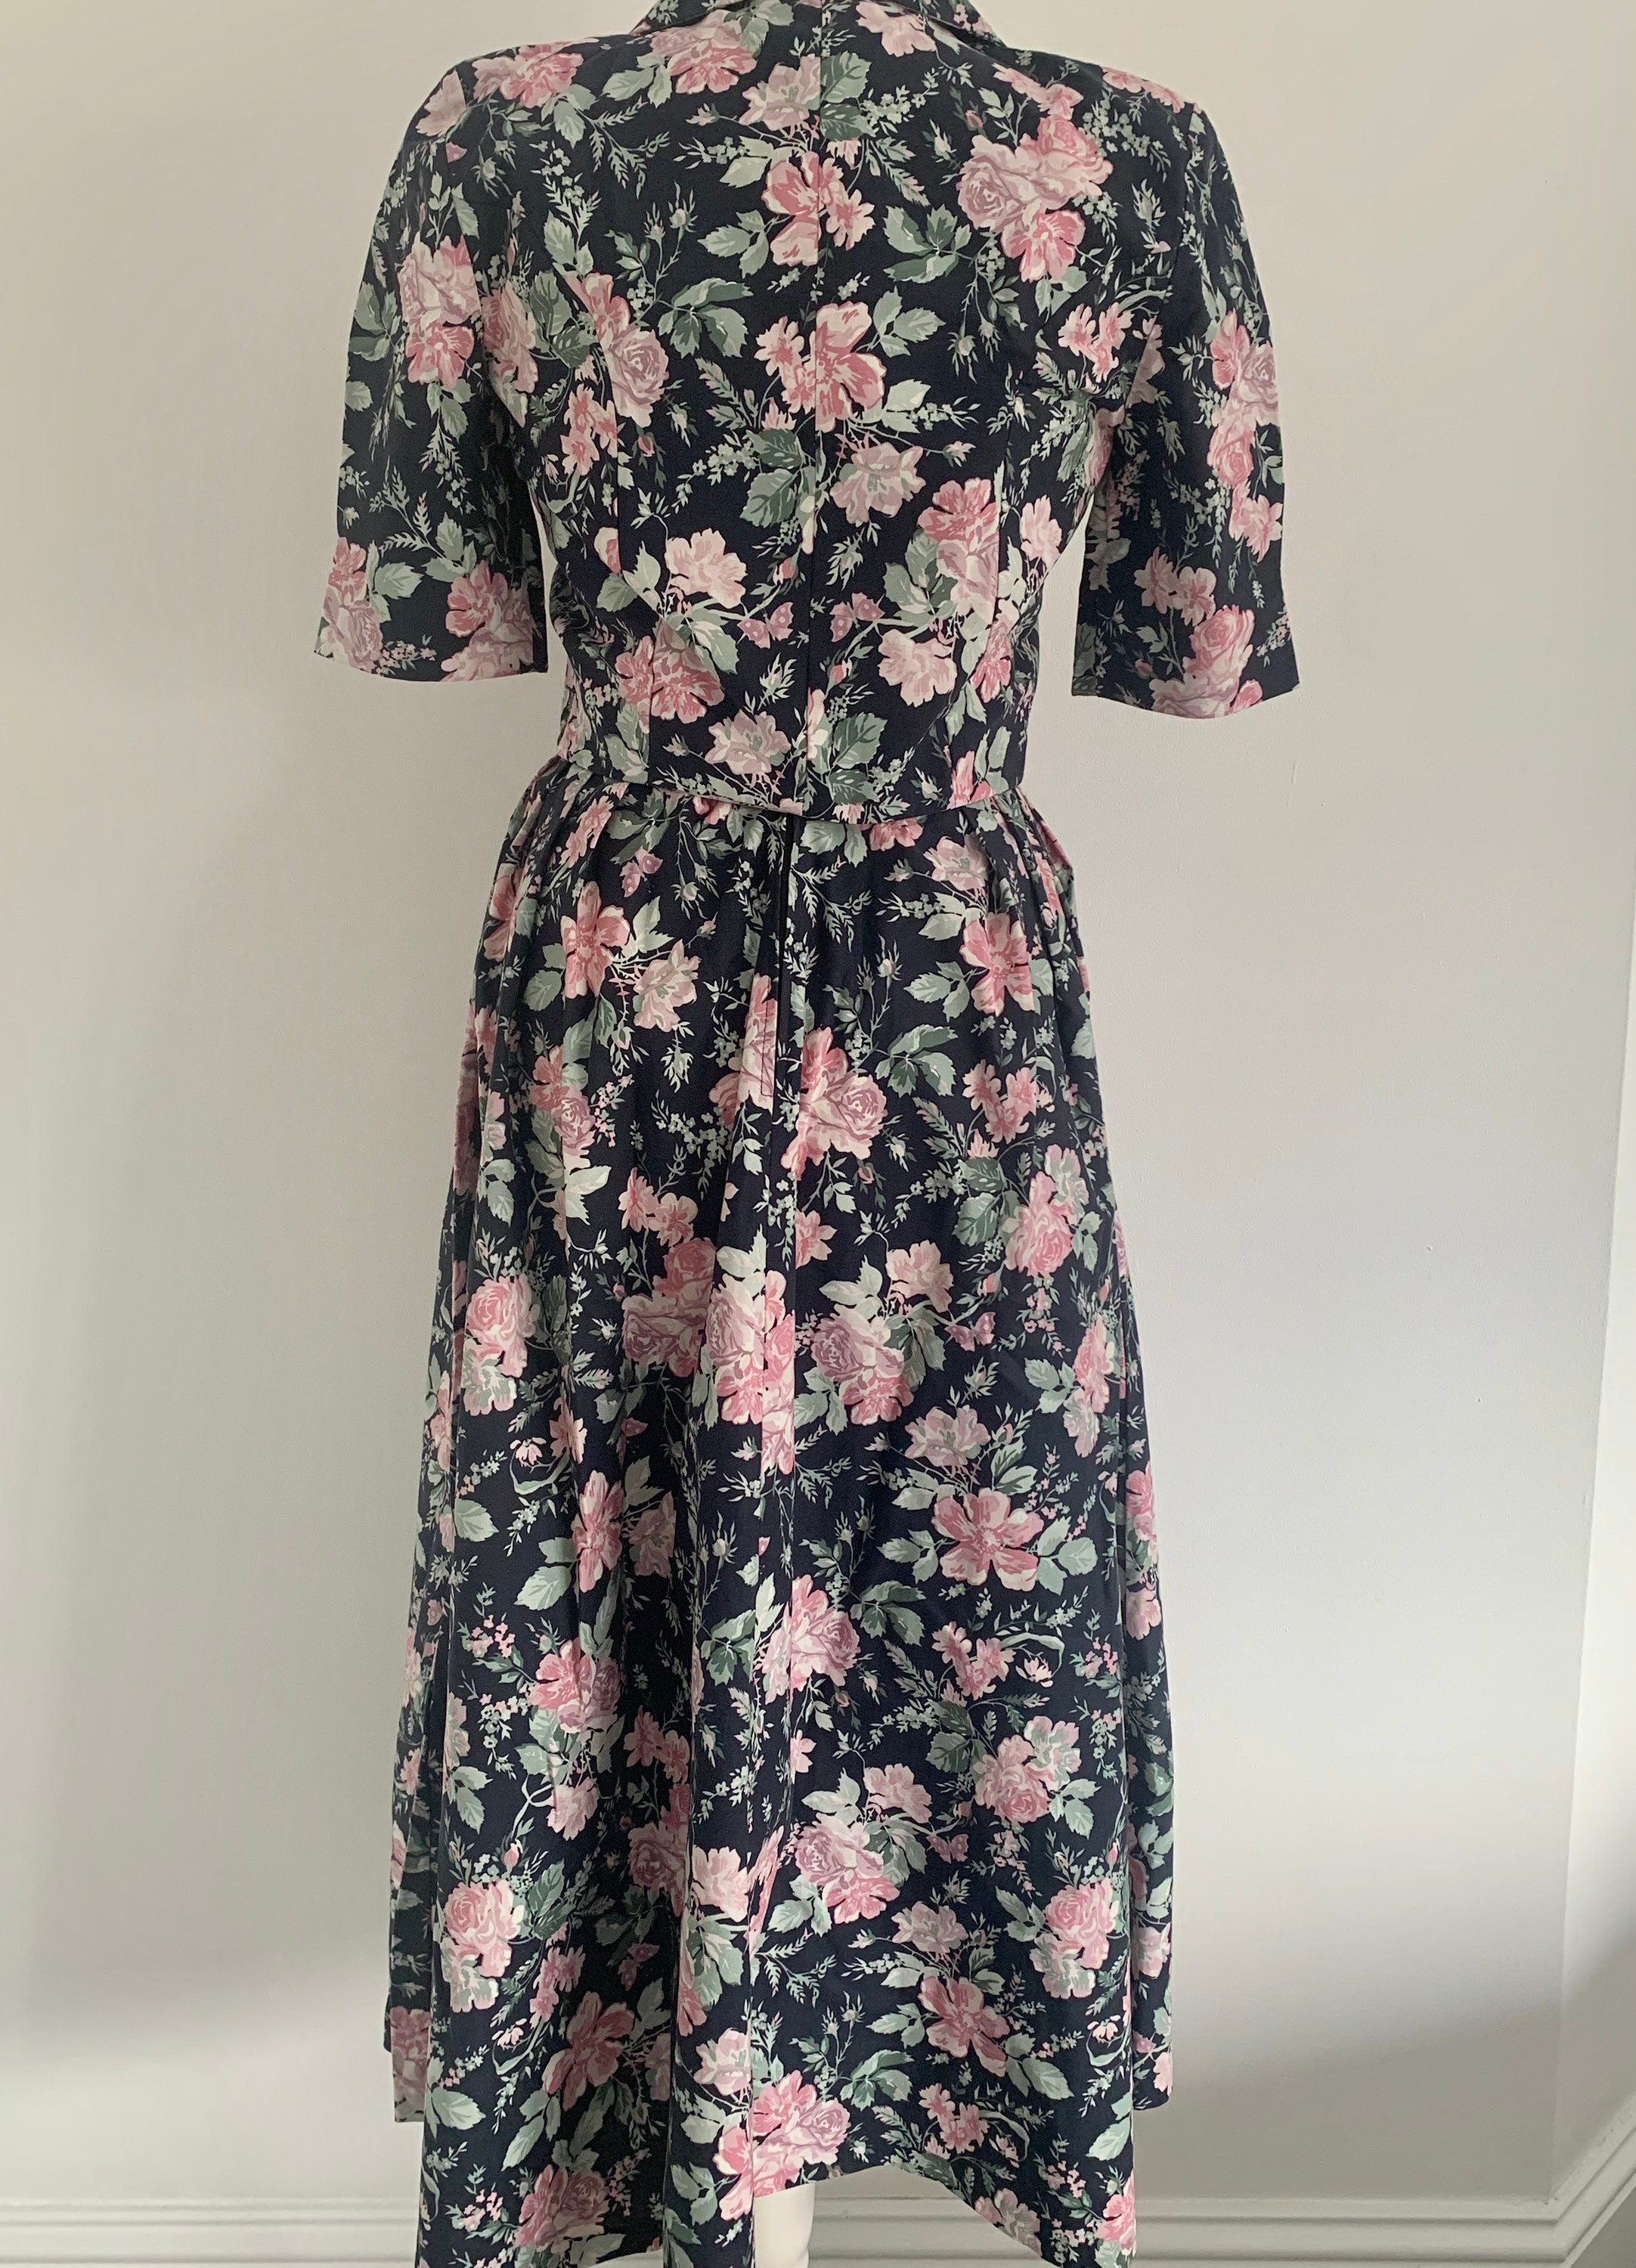 LAURA ASHLEY Floral Rare Two Piece 80s Vintage Dress and | Etsy